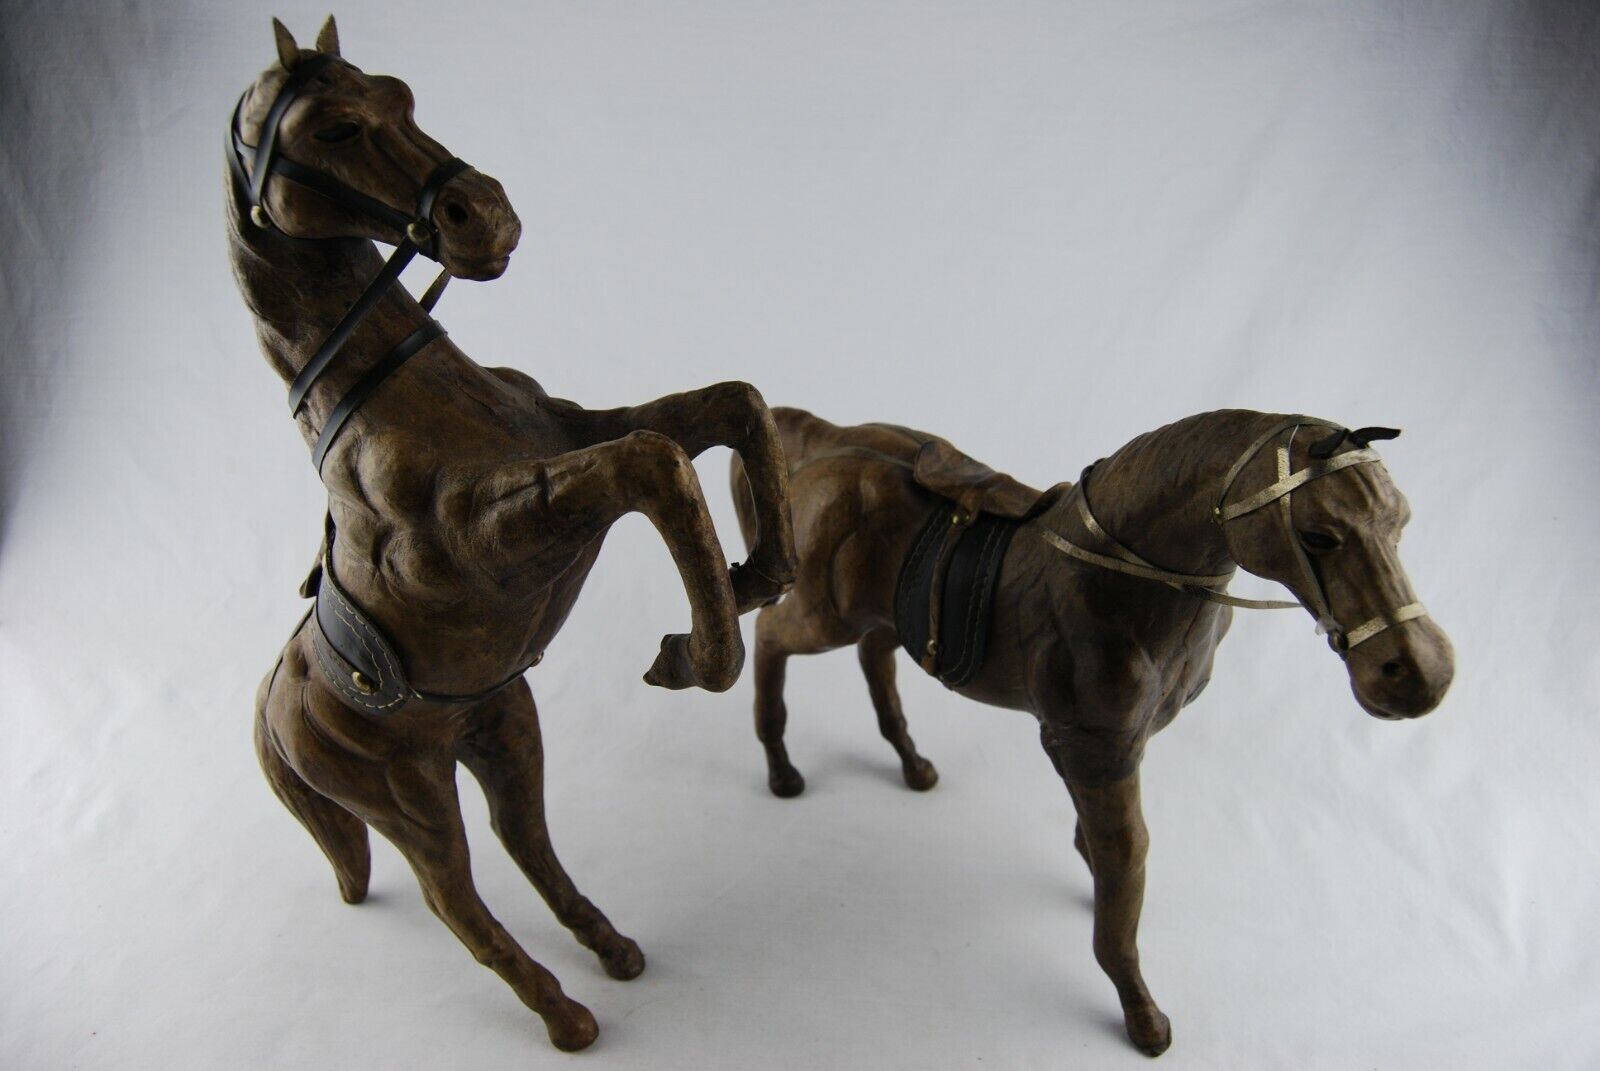 Pair of Vintage Leather Wrapped Horse Figure Figurine Statue Antique Equestrian